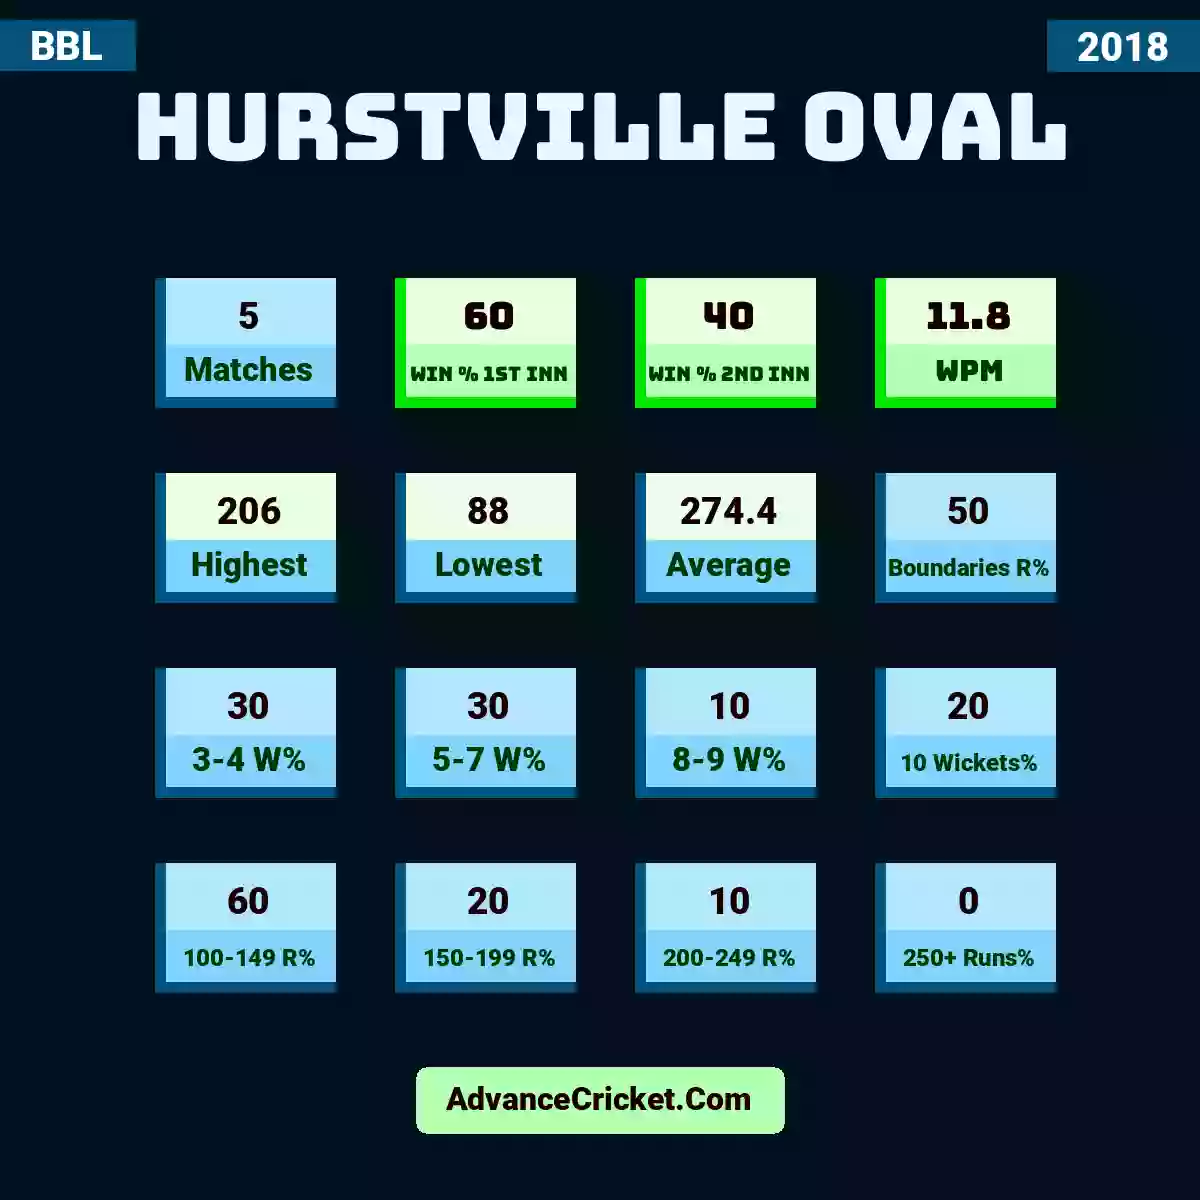 Image showing Hurstville Oval with Matches: 5, Win % 1st Inn: 60, Win % 2nd Inn: 40, WPM: 11.8, Highest: 206, Lowest: 88, Average: 274.4, Boundaries R%: 50, 3-4 W%: 30, 5-7 W%: 30, 8-9 W%: 10, 10 Wickets%: 20, 100-149 R%: 60, 150-199 R%: 20, 200-249 R%: 10, 250+ Runs%: 0.